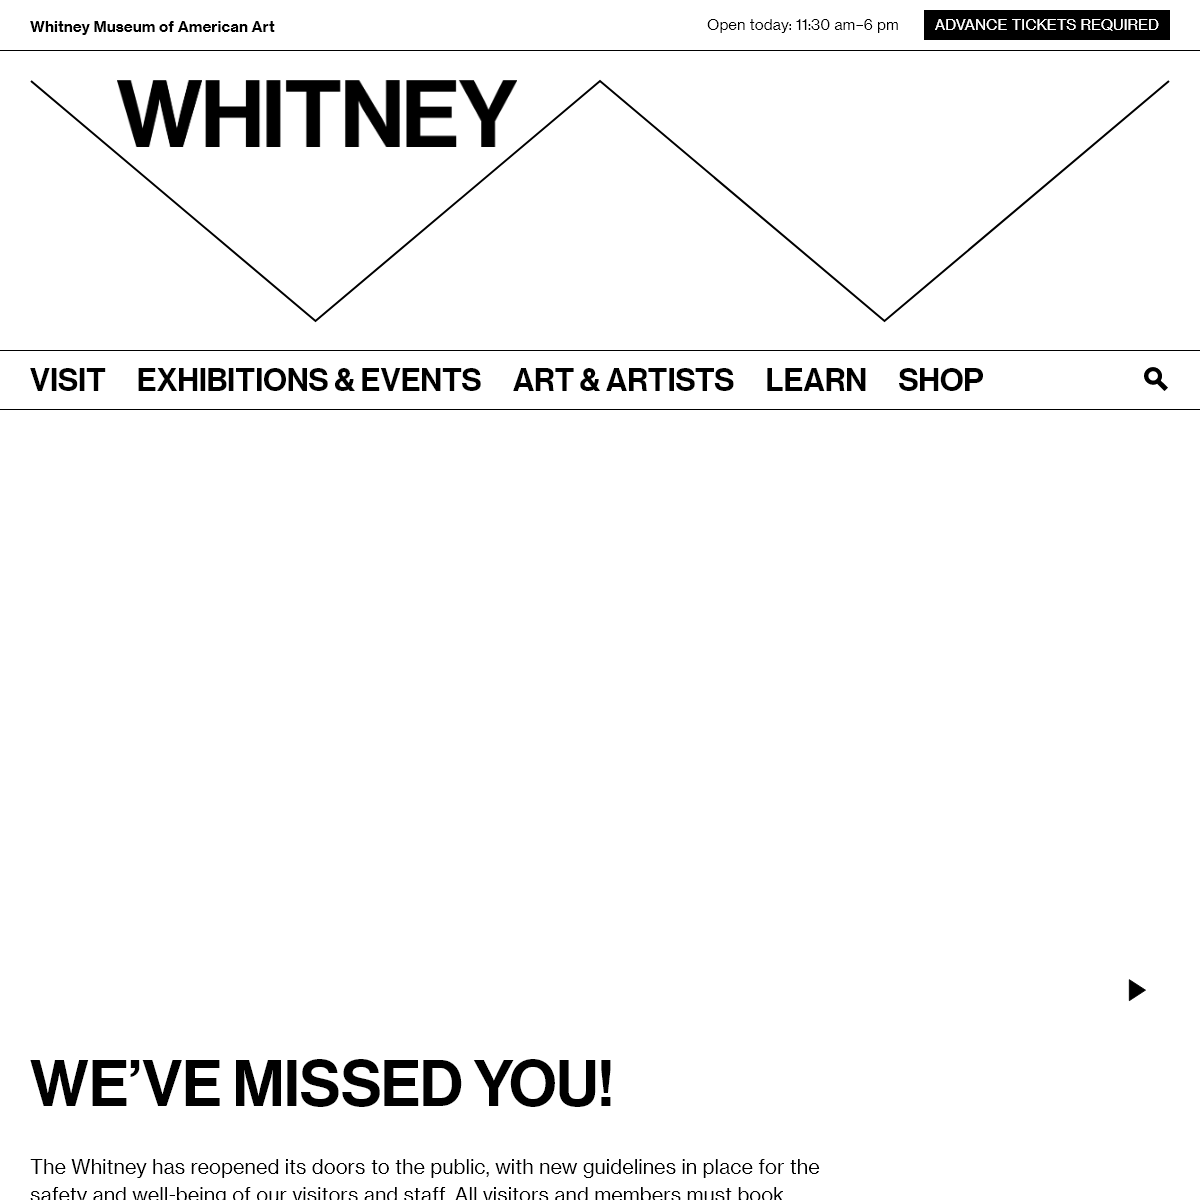 A complete backup of whitney.org